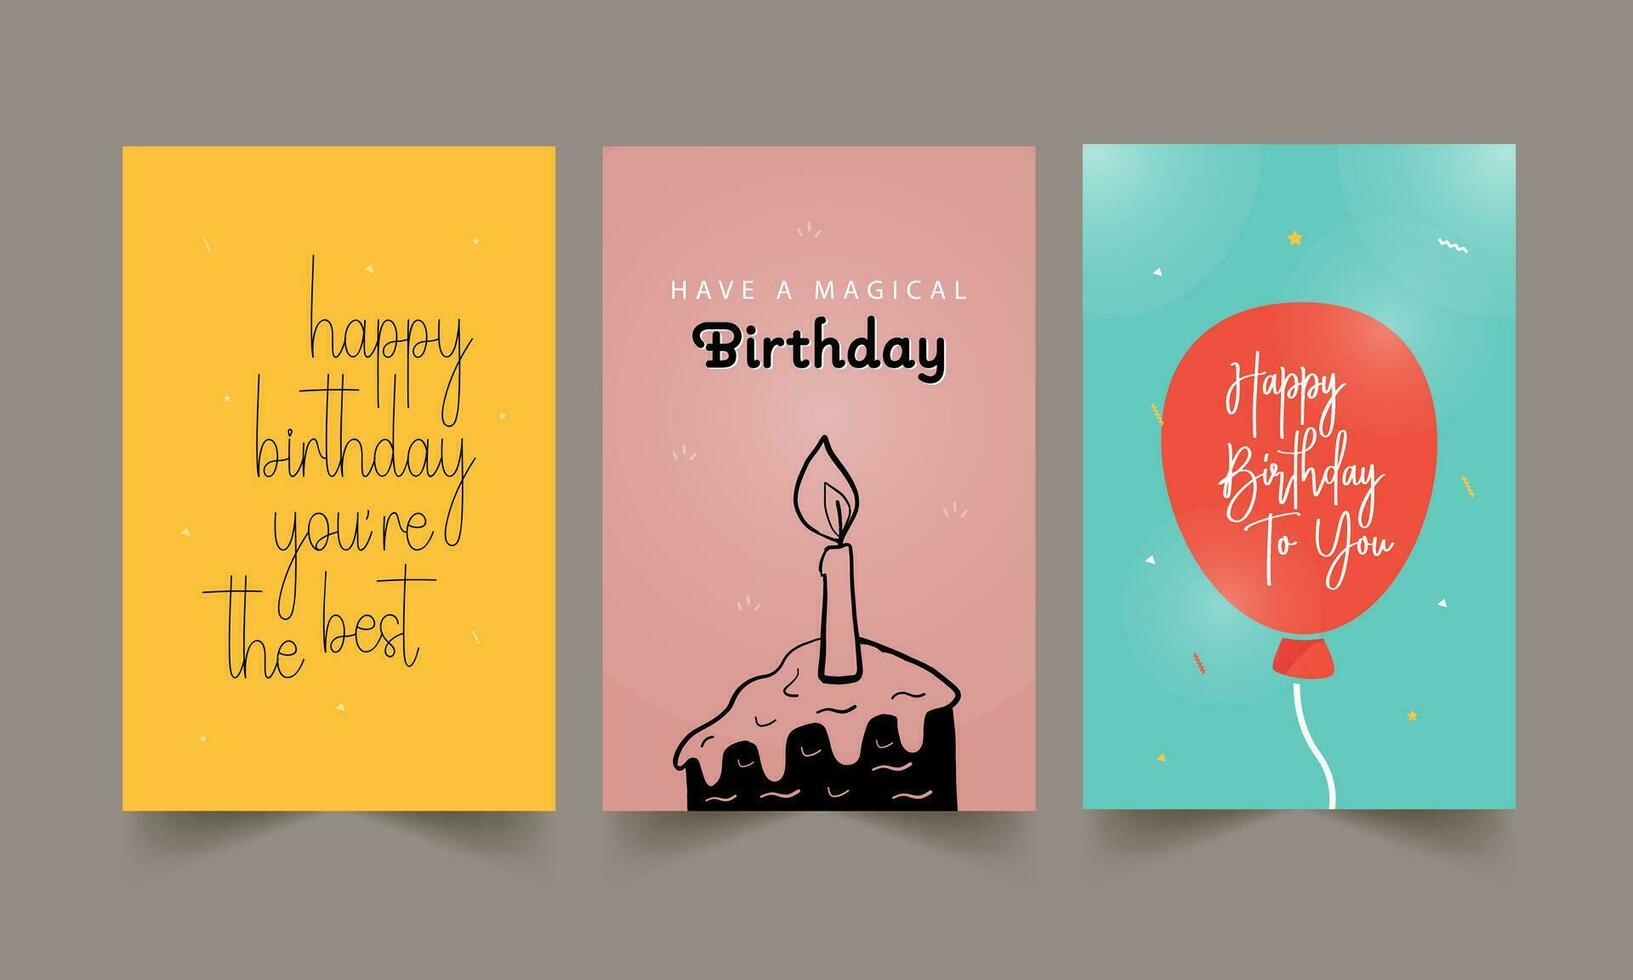 Birthday greeting cards and invitation cards with cake, balloons, and typography design set vector